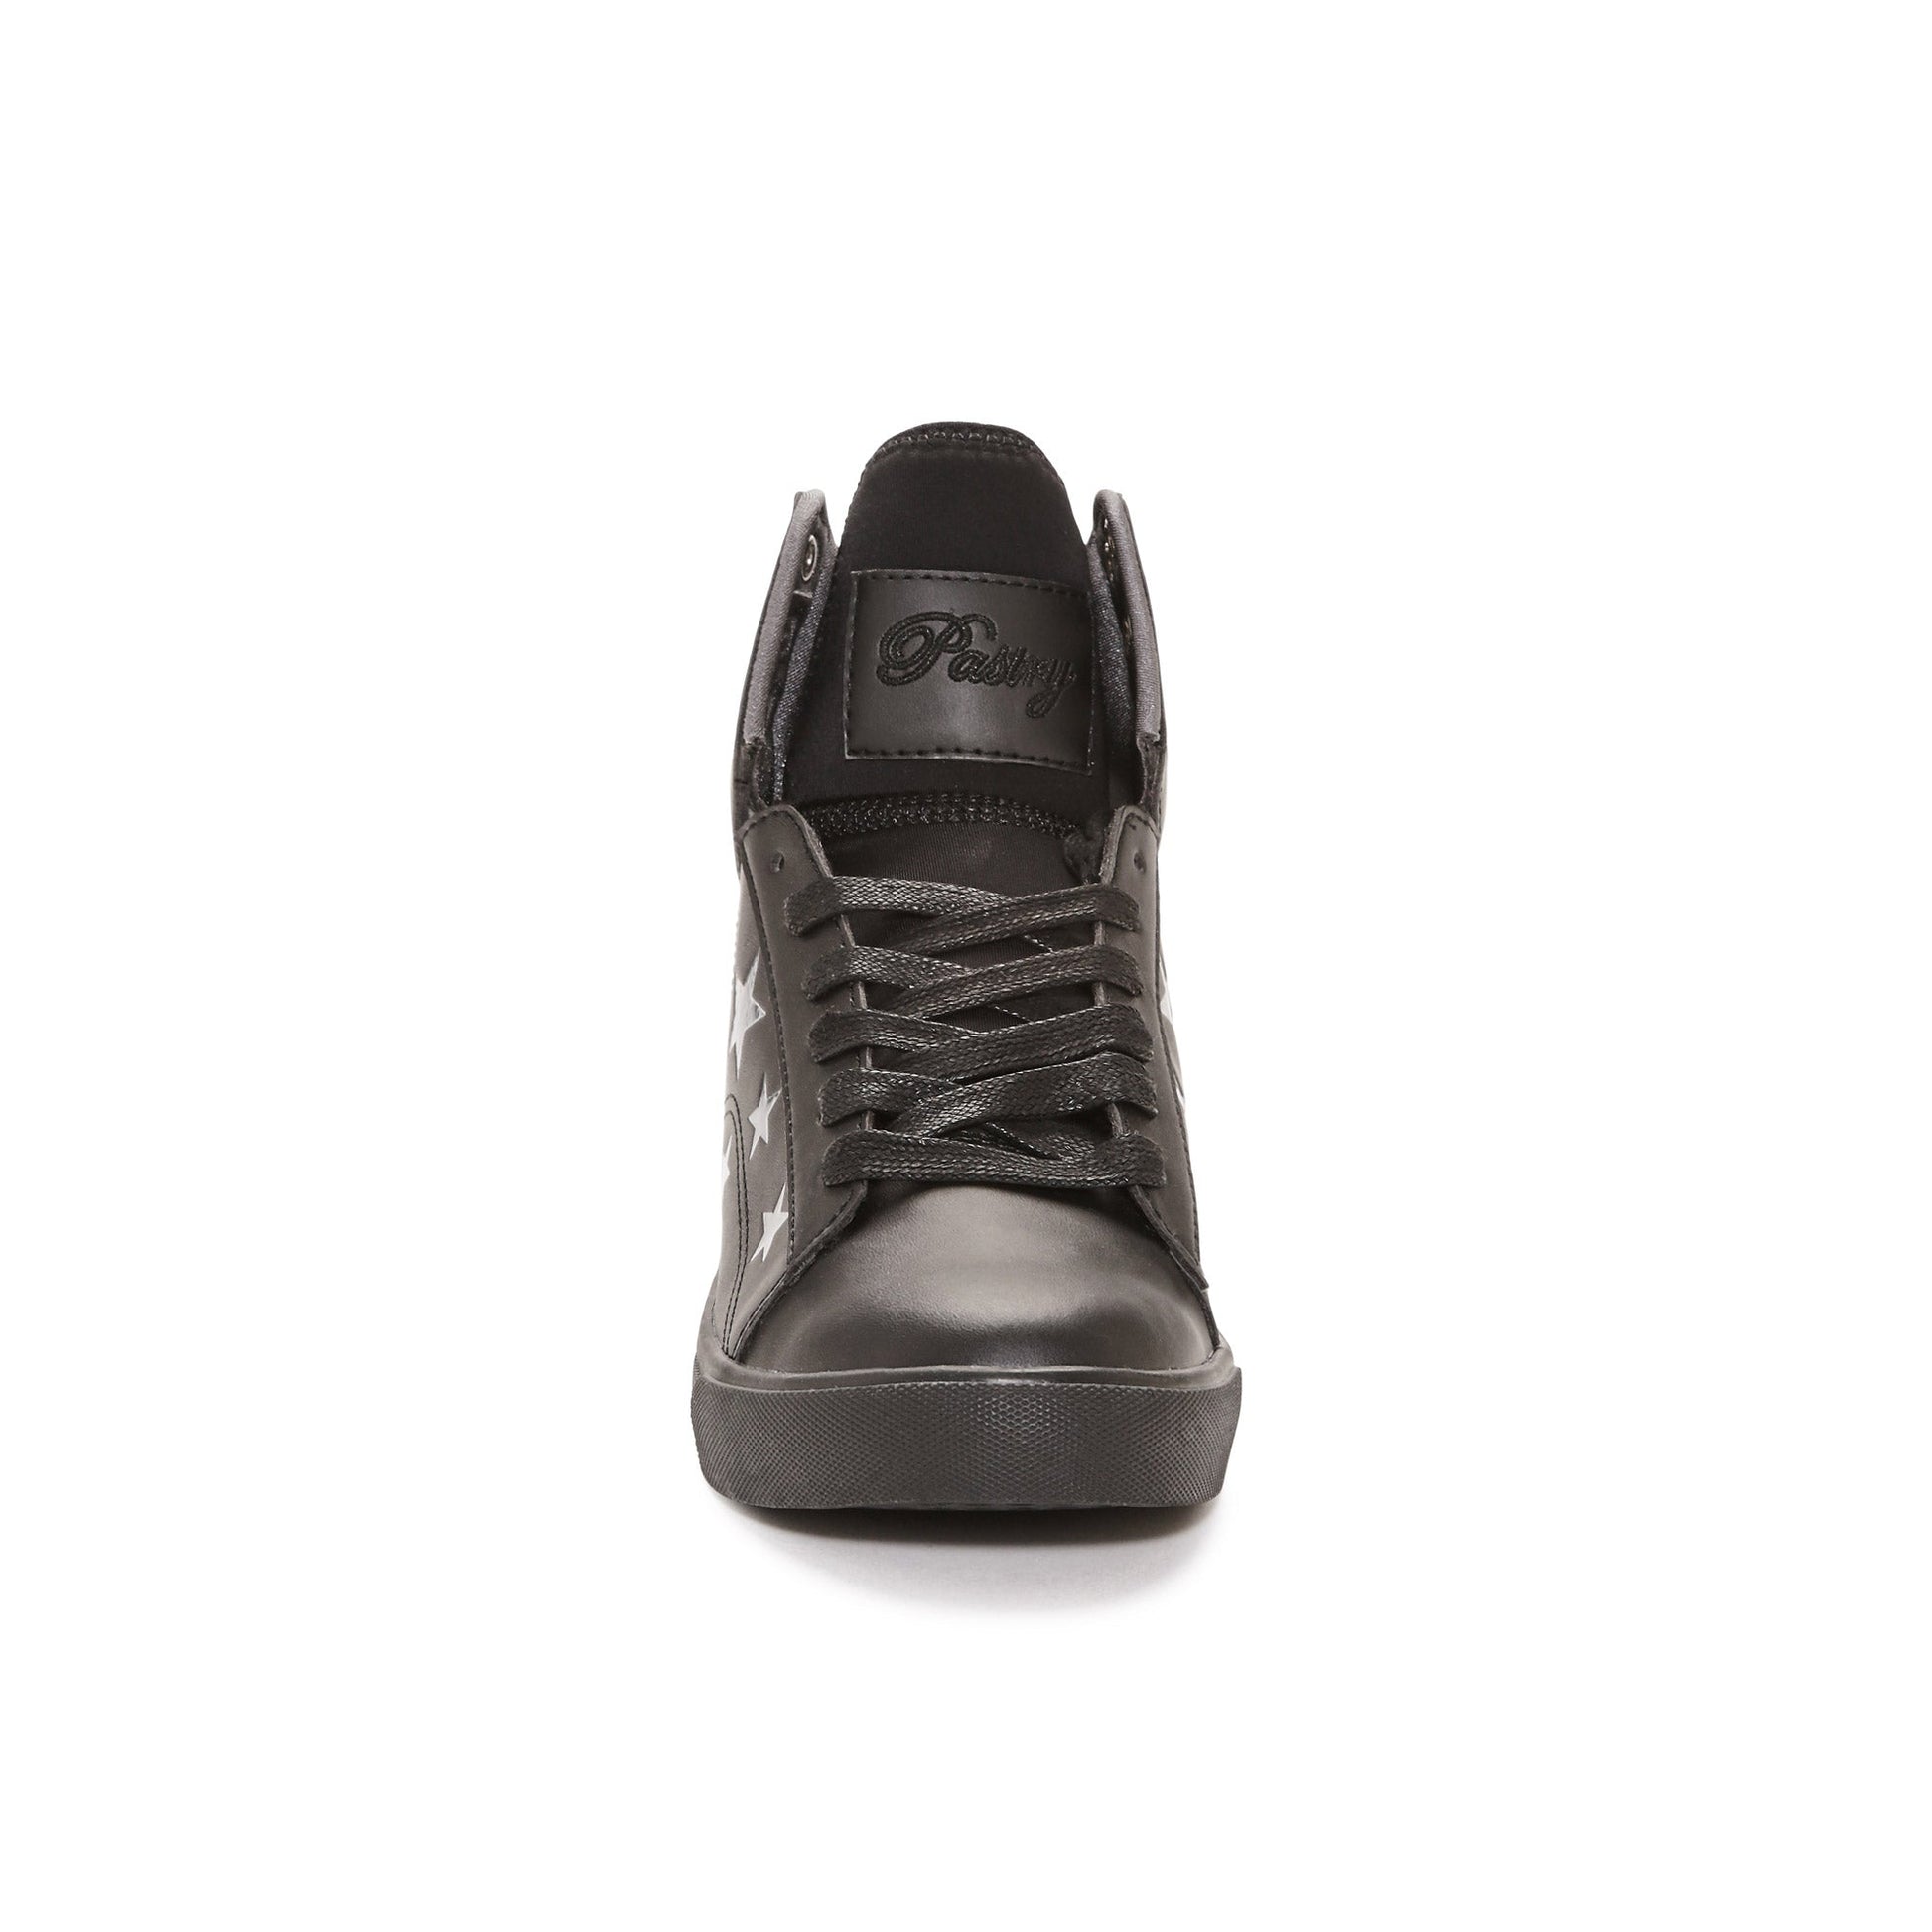 Pastry Pop Tart Star Youth Sneaker in Black/Black front view